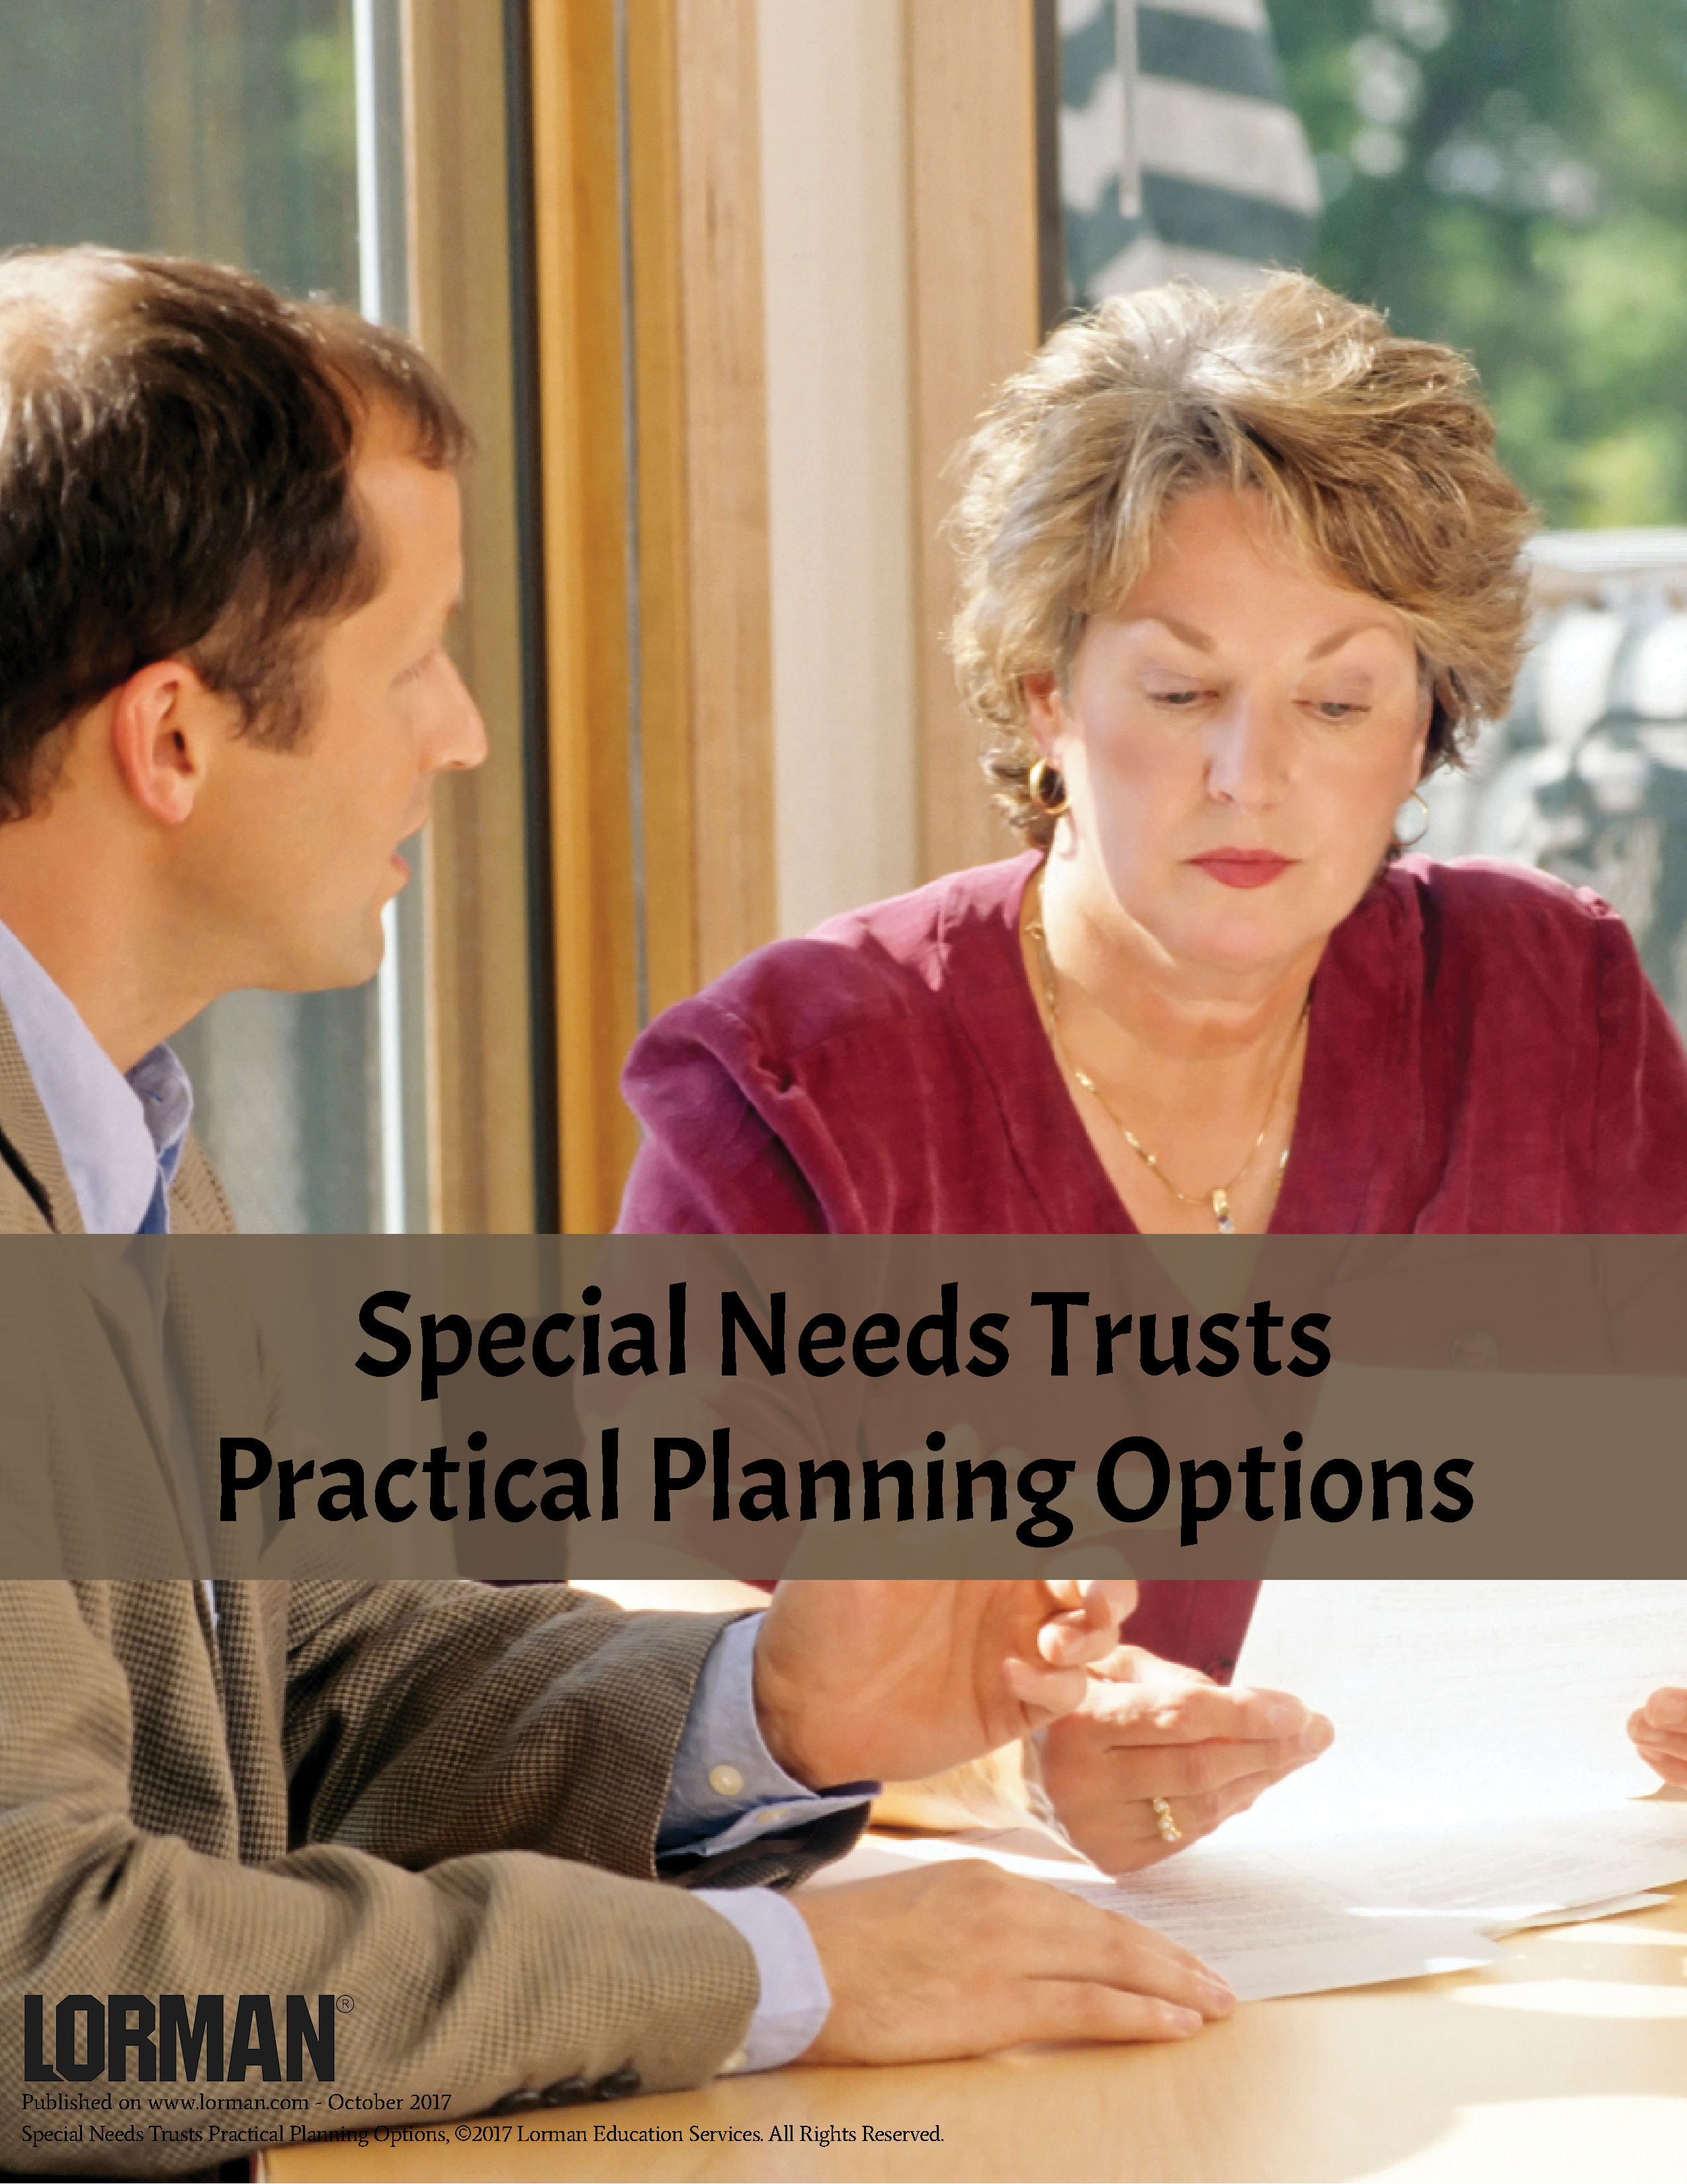 Special Needs Trusts Practical Planning Options